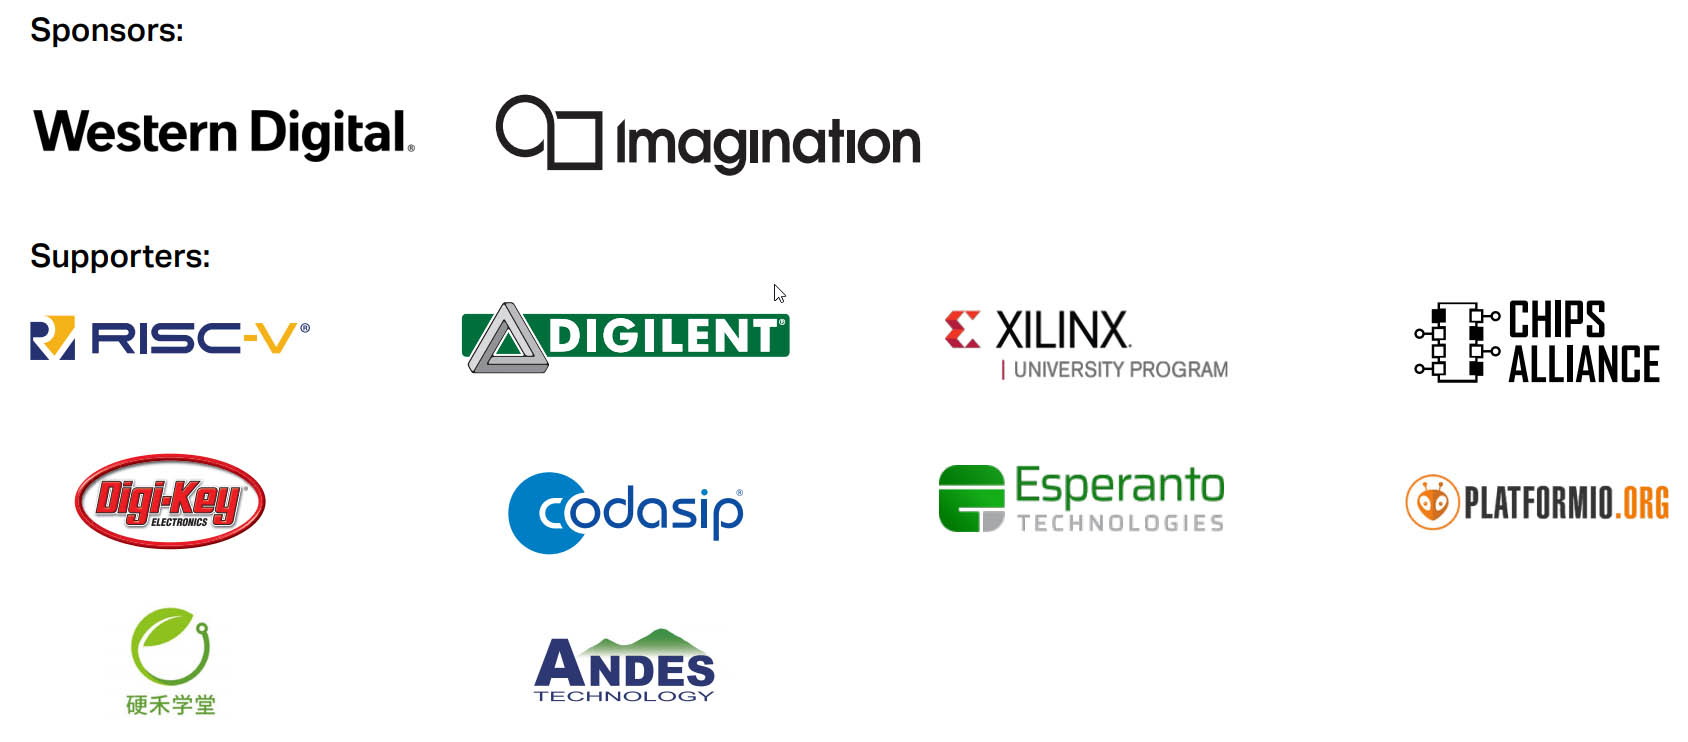 The sponsors and supporters of Imagination University Programme